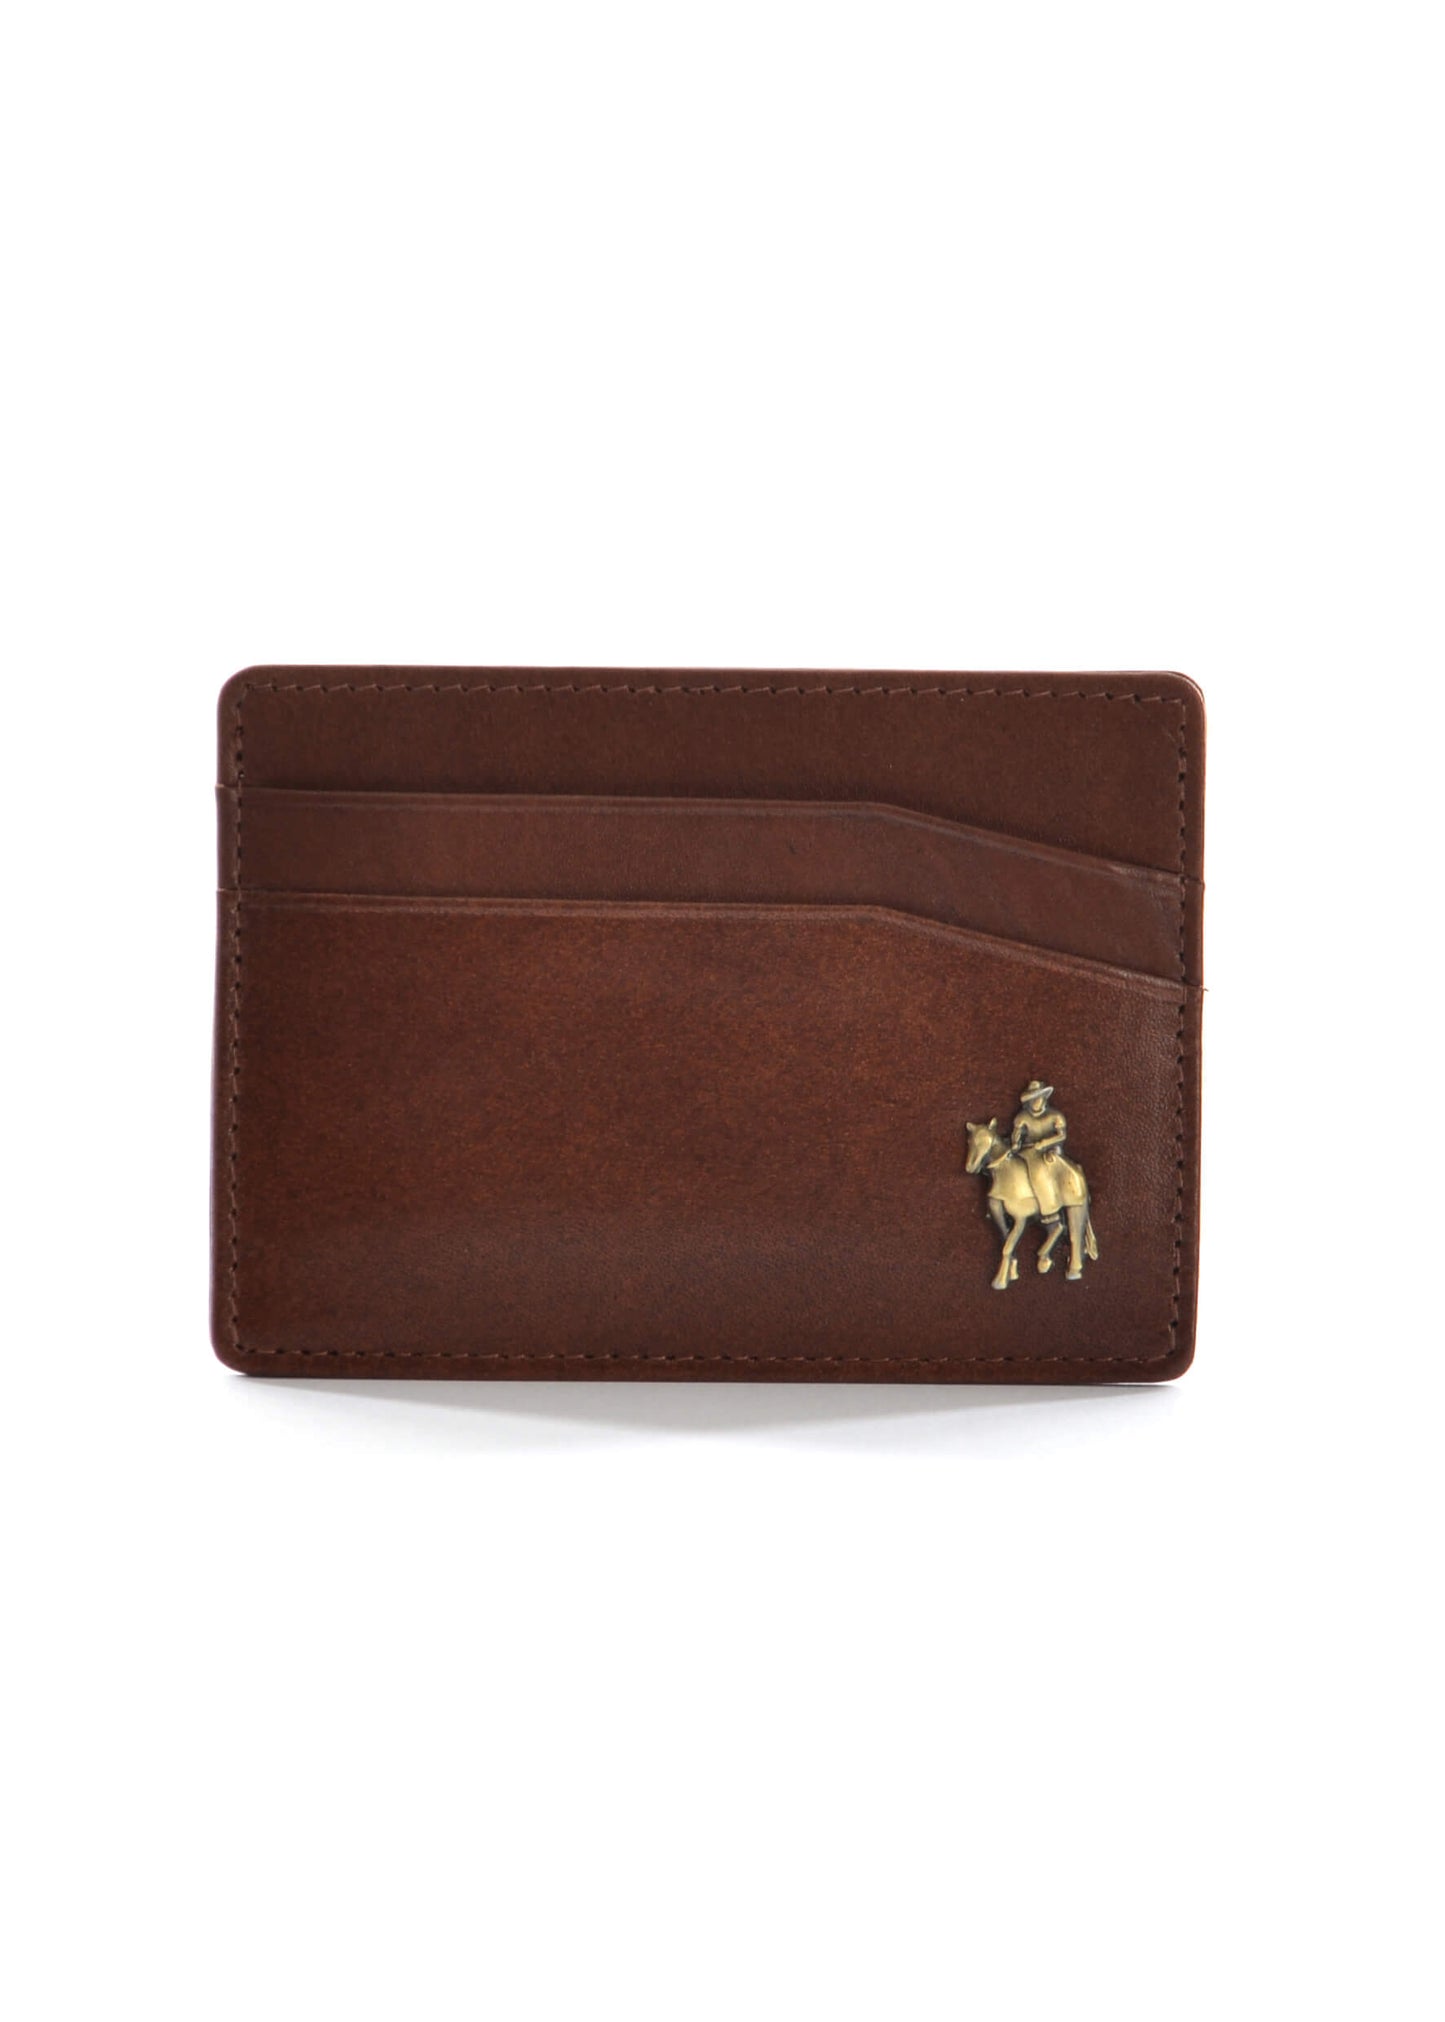 Thomas Cook Cootamundra Brown Leather Cardholder